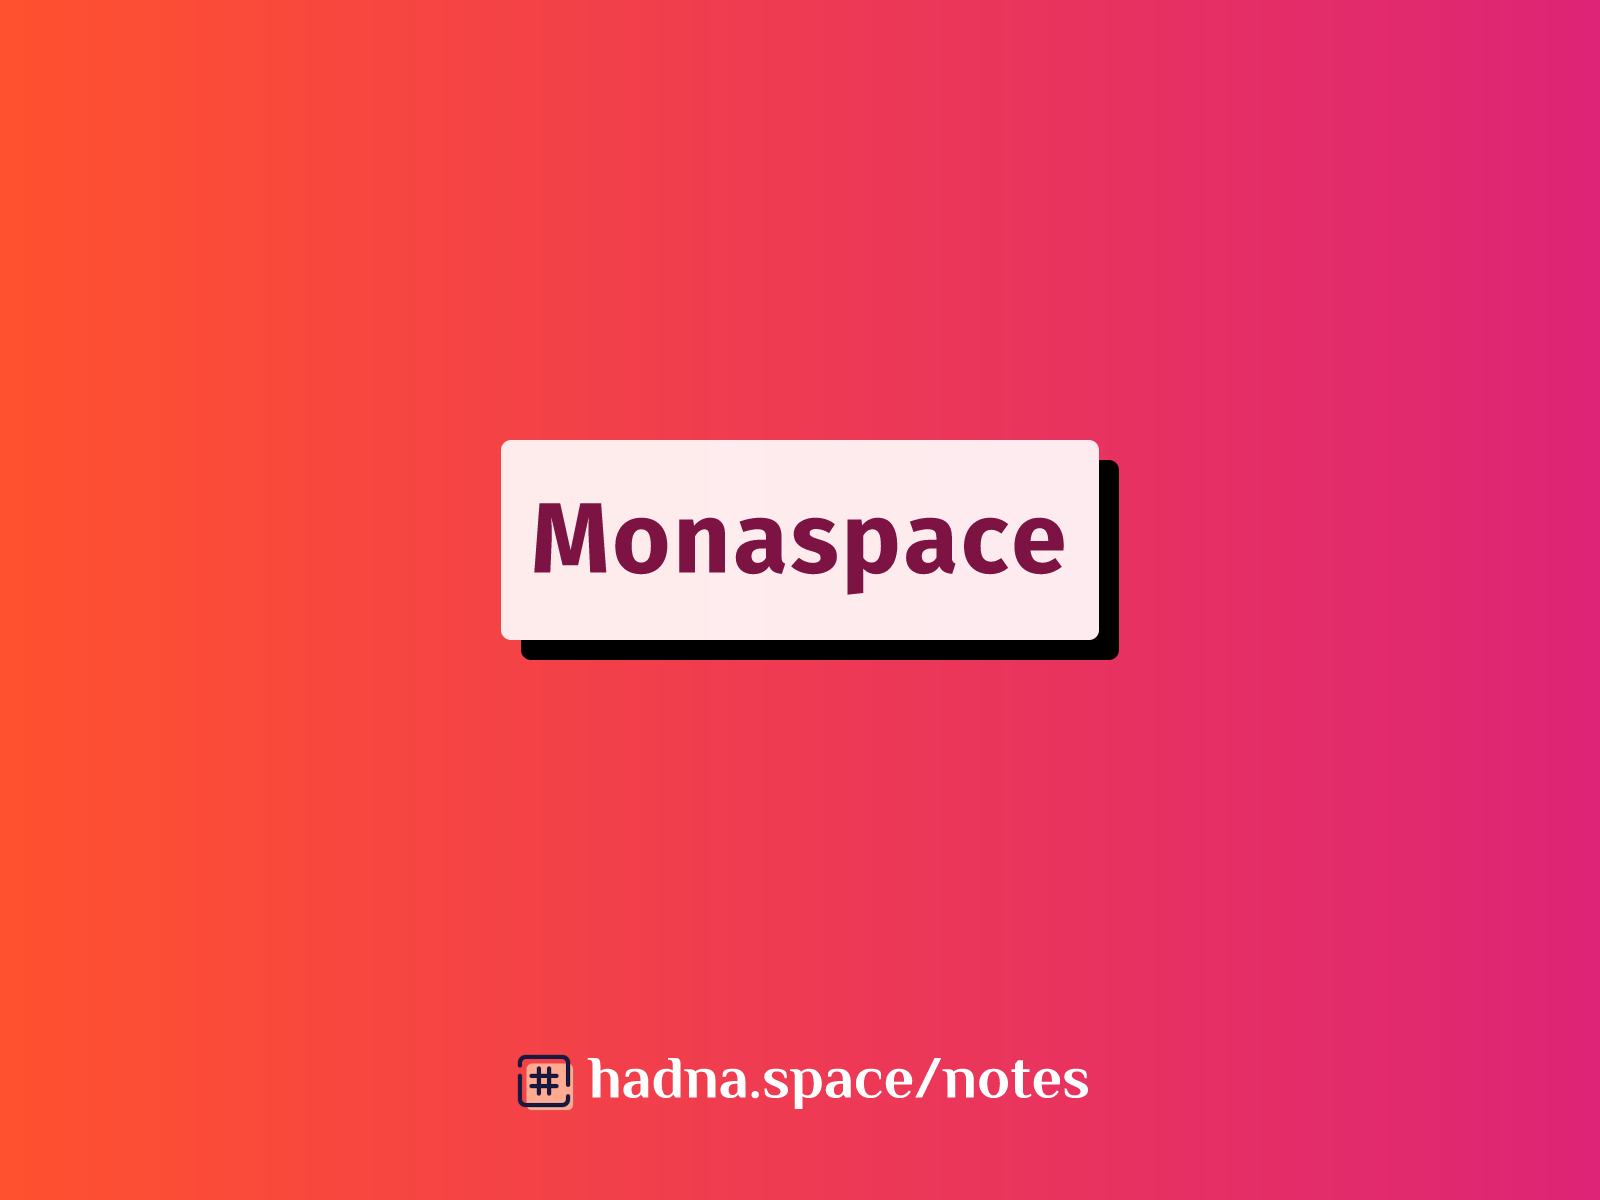 Monaspace by GitHub Next: An Innovative Superfamily of Fonts for Code